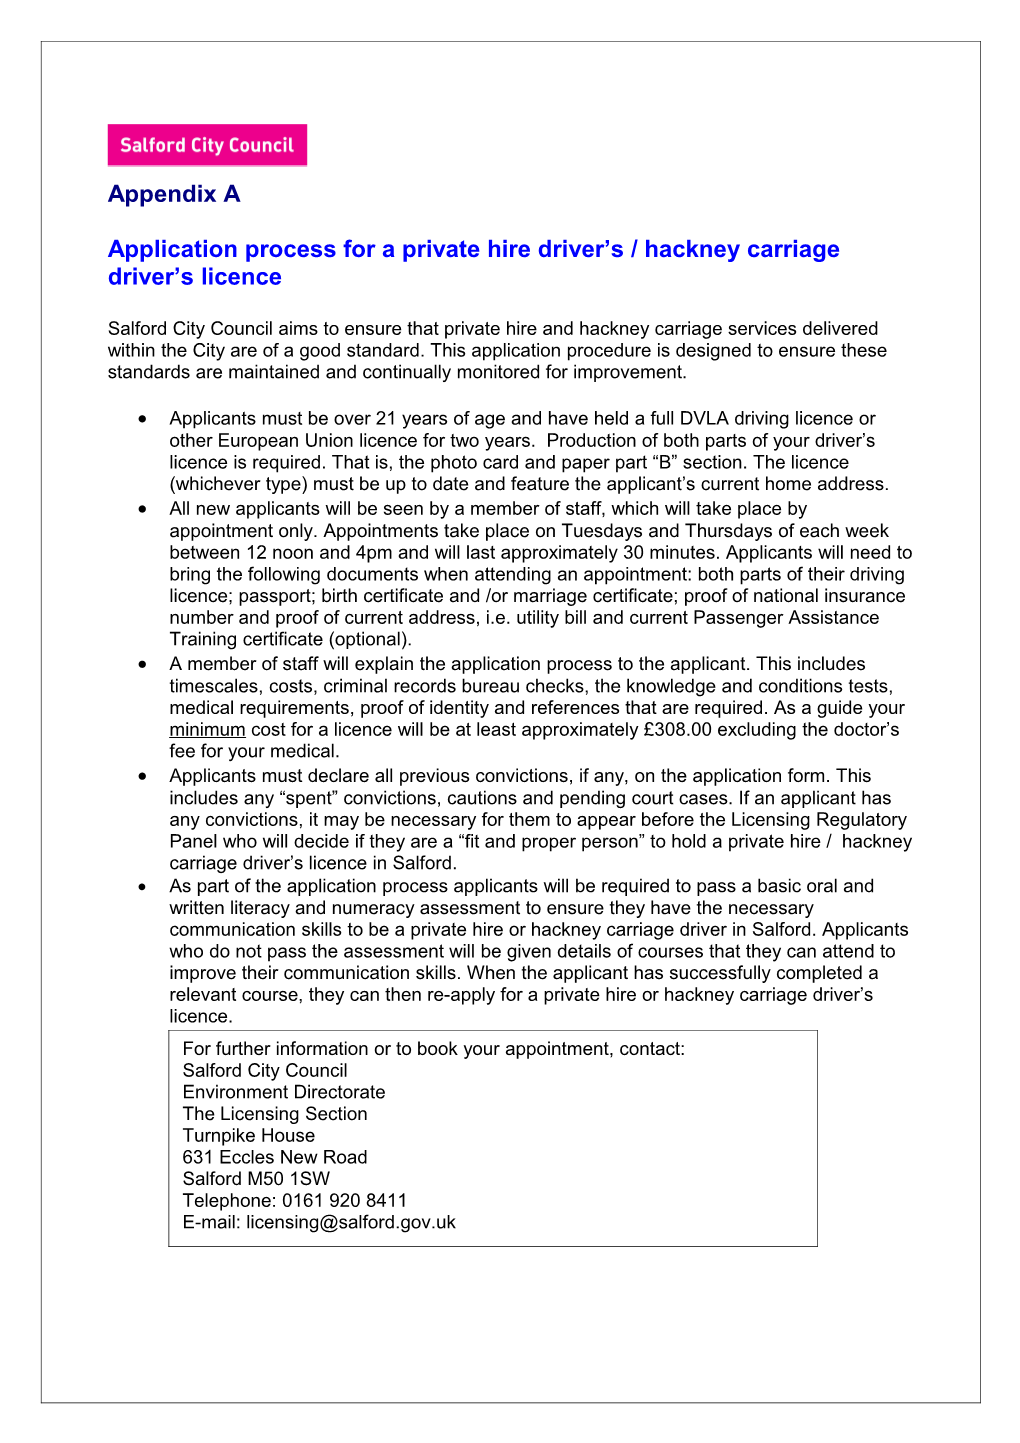 Application Process for a Private Hire Driver S / Hackney Carriage Driver S Licence